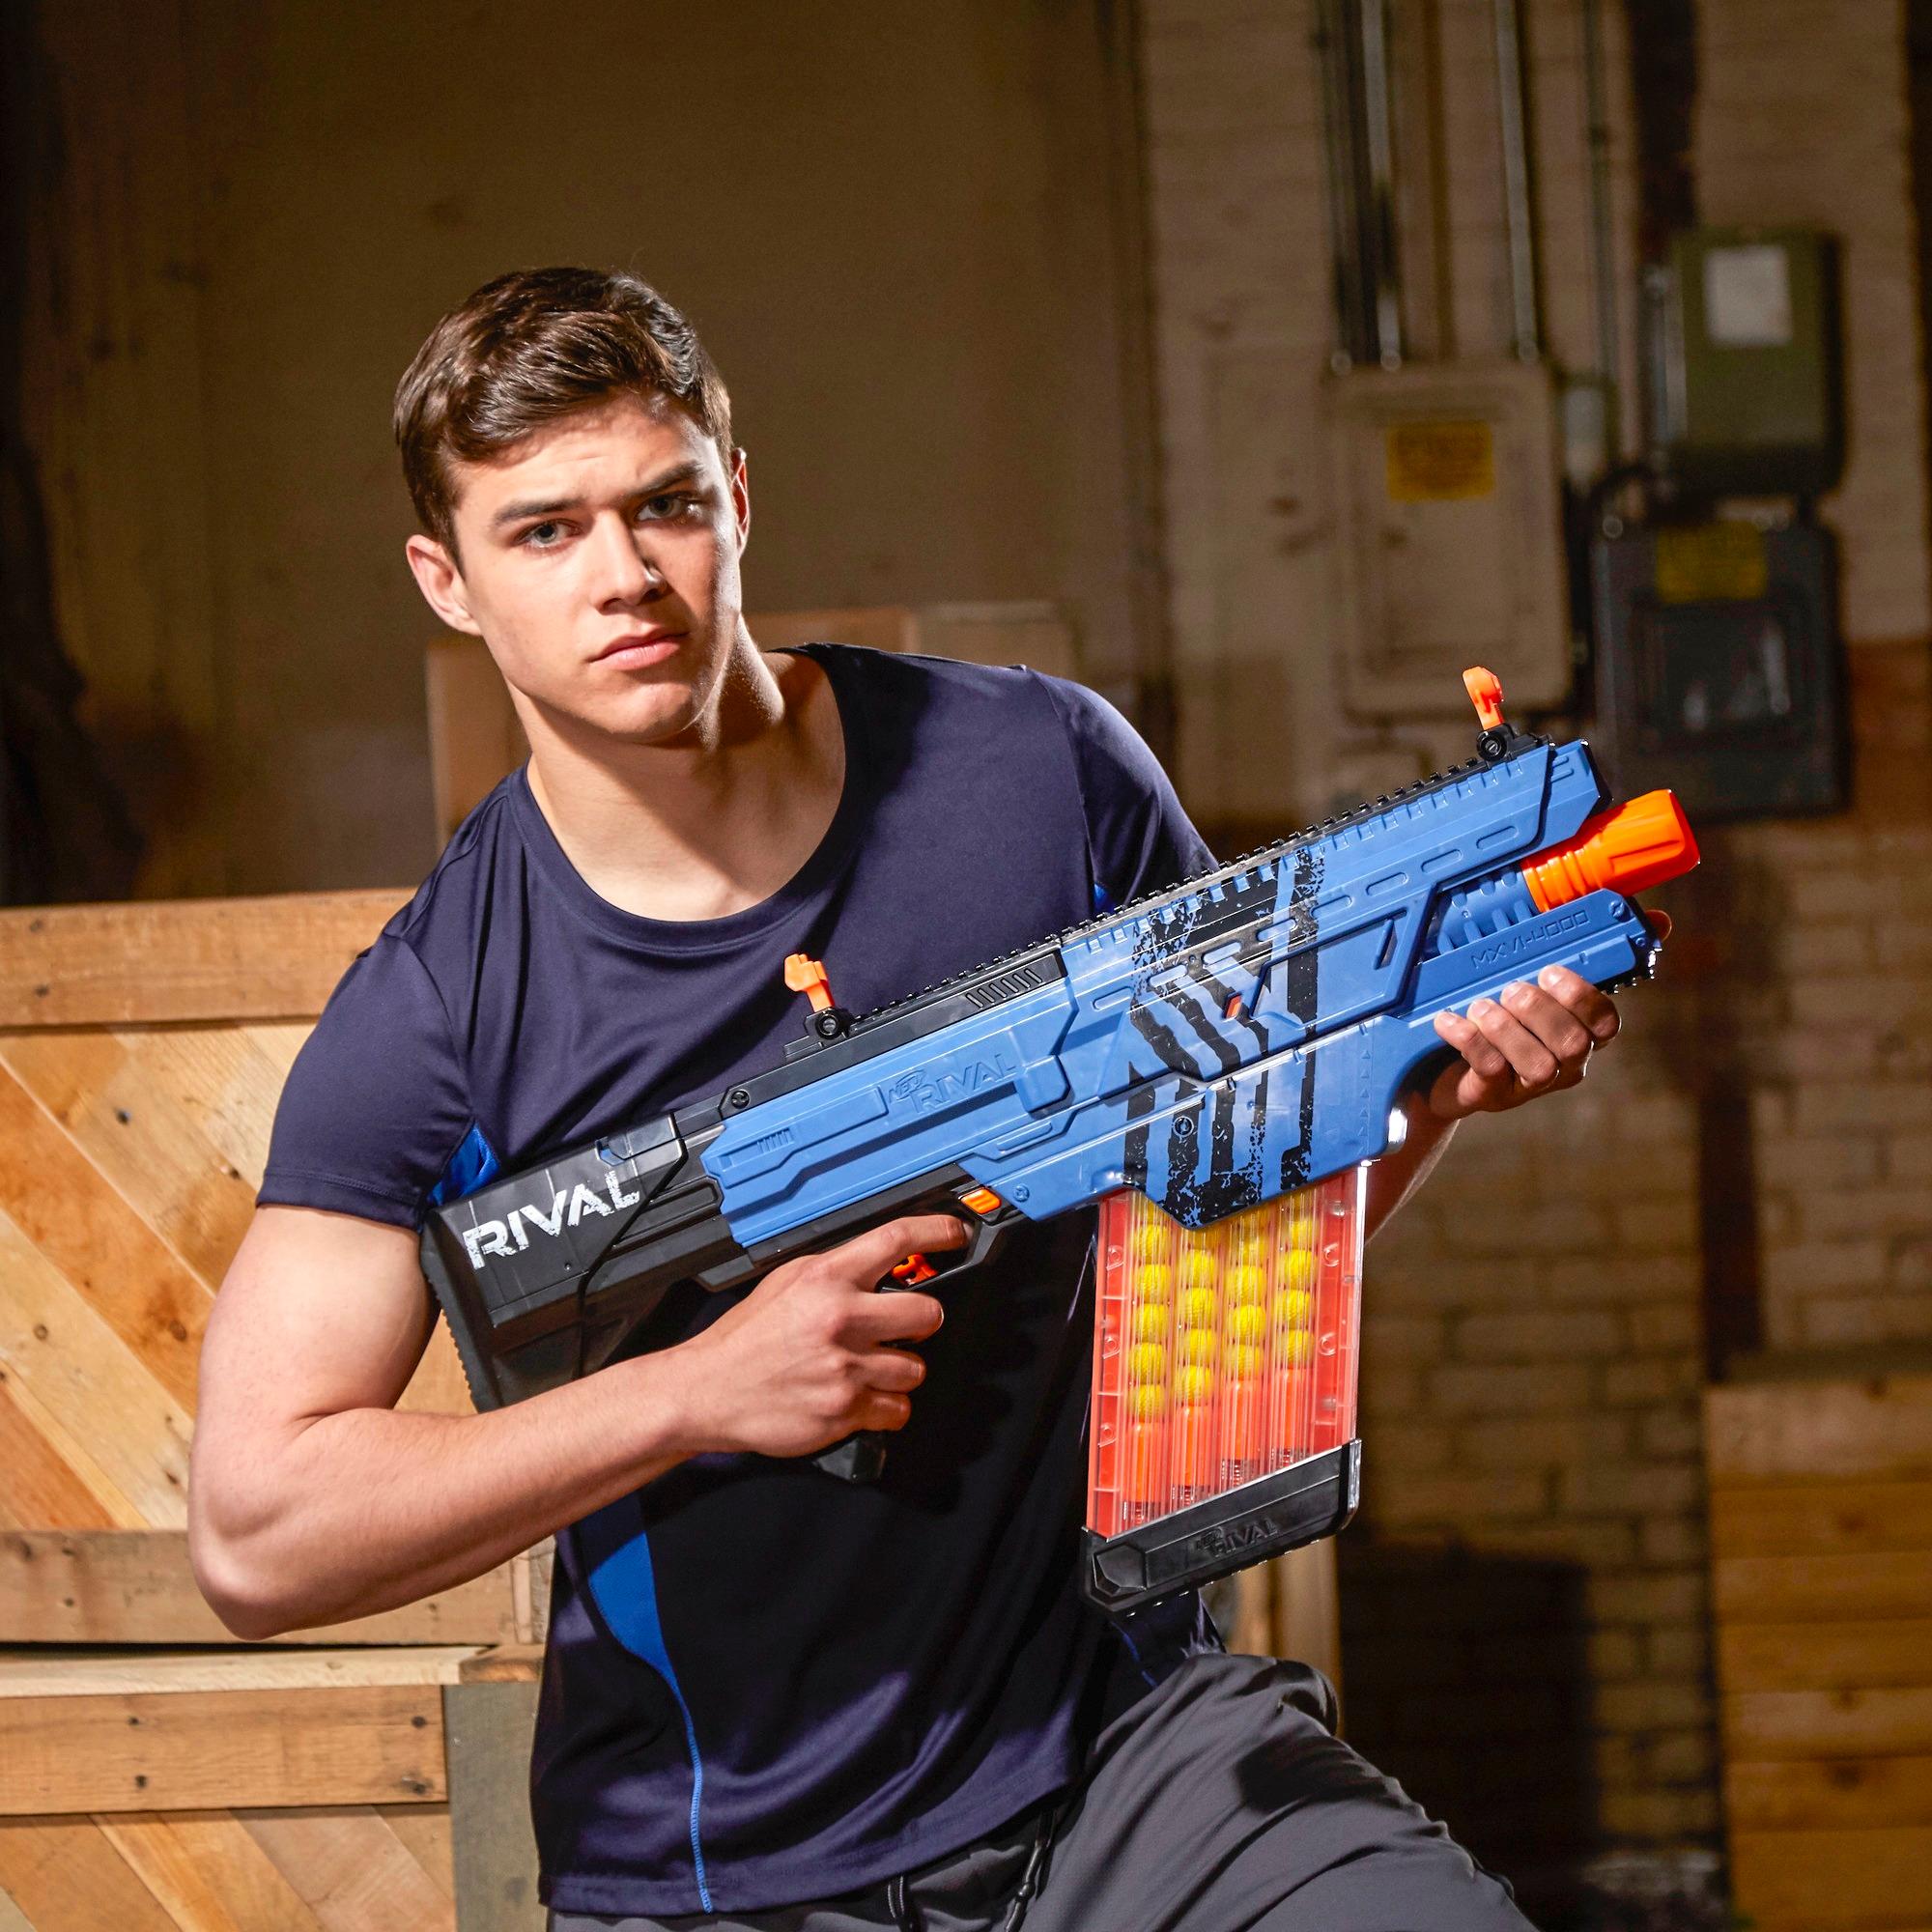 NERF Rival Khaos Mxvi-4000 Blaster Blue With 10 Balls for sale online 